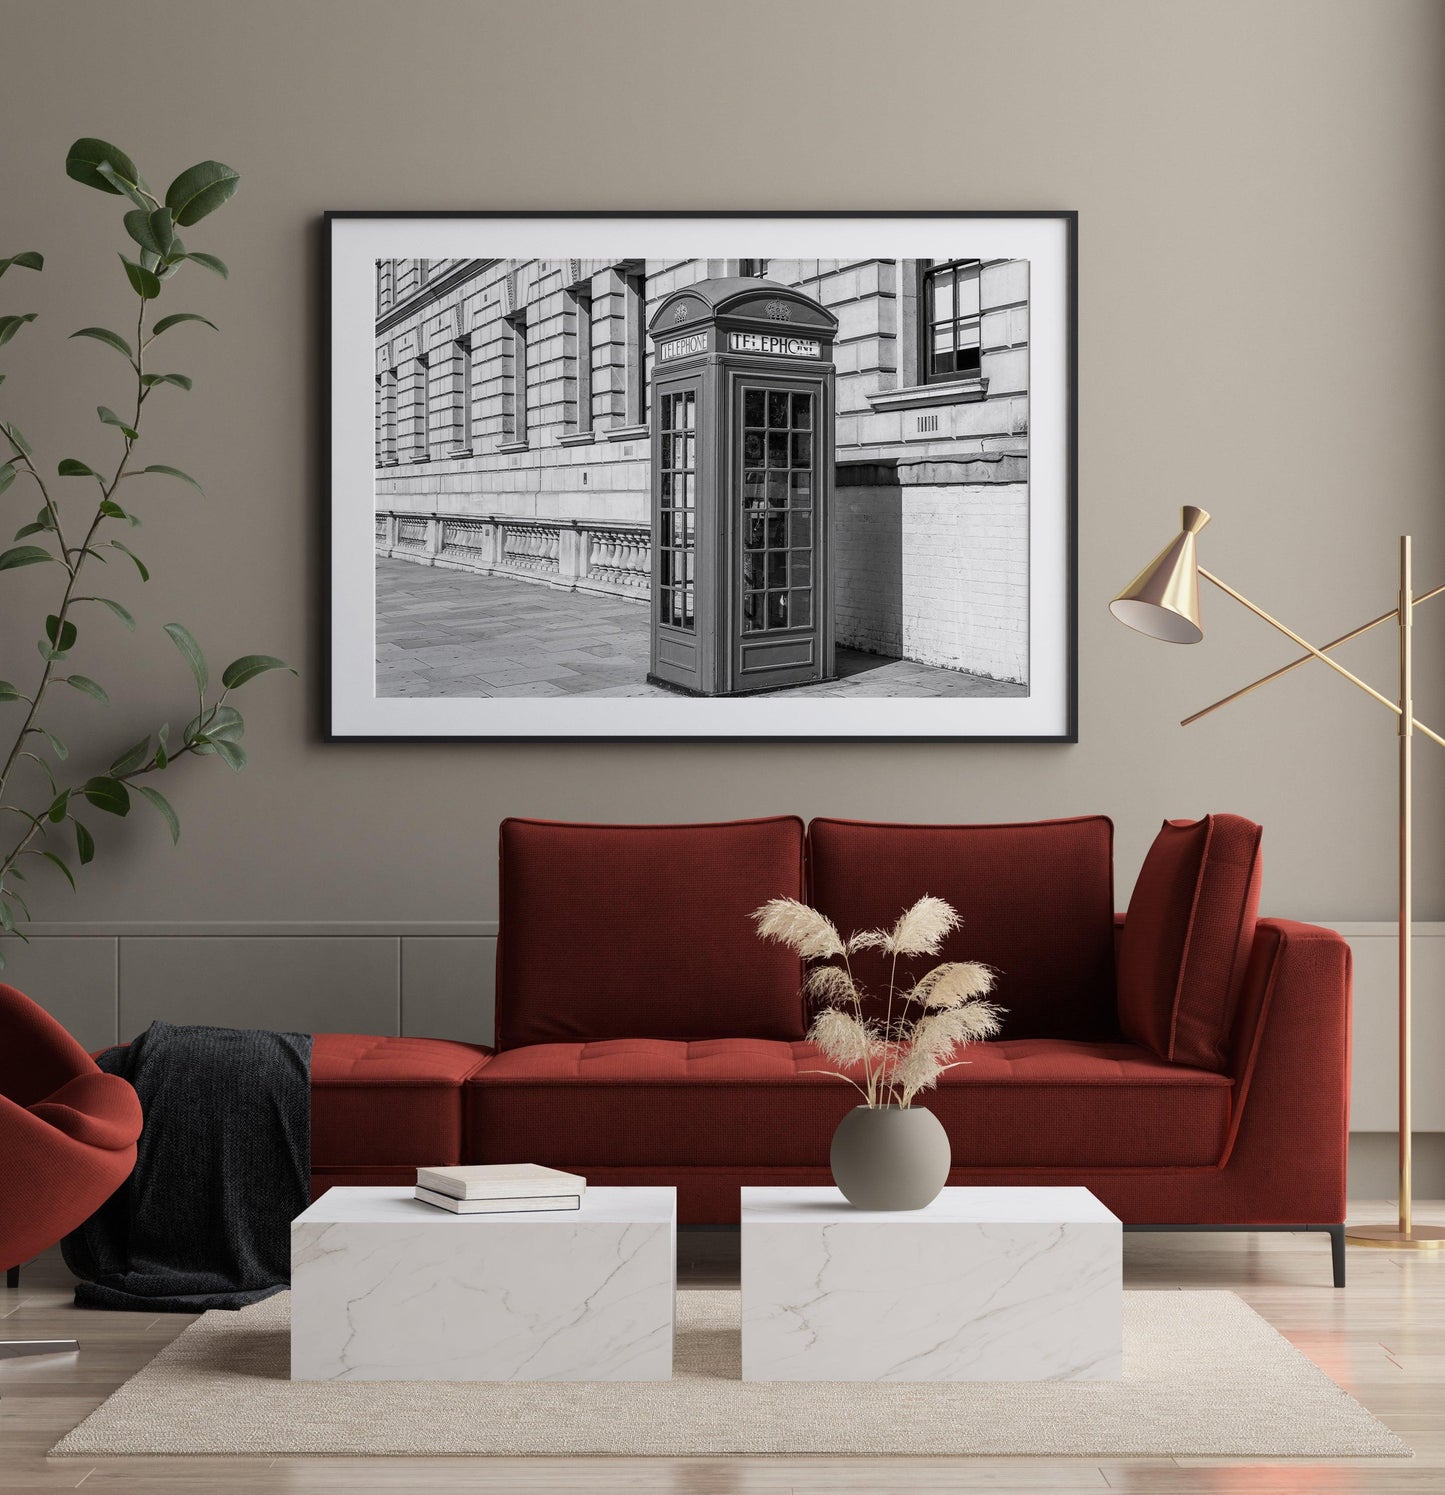 Black and White Telephone Booth III | London Photography Print - Departures Print Shop